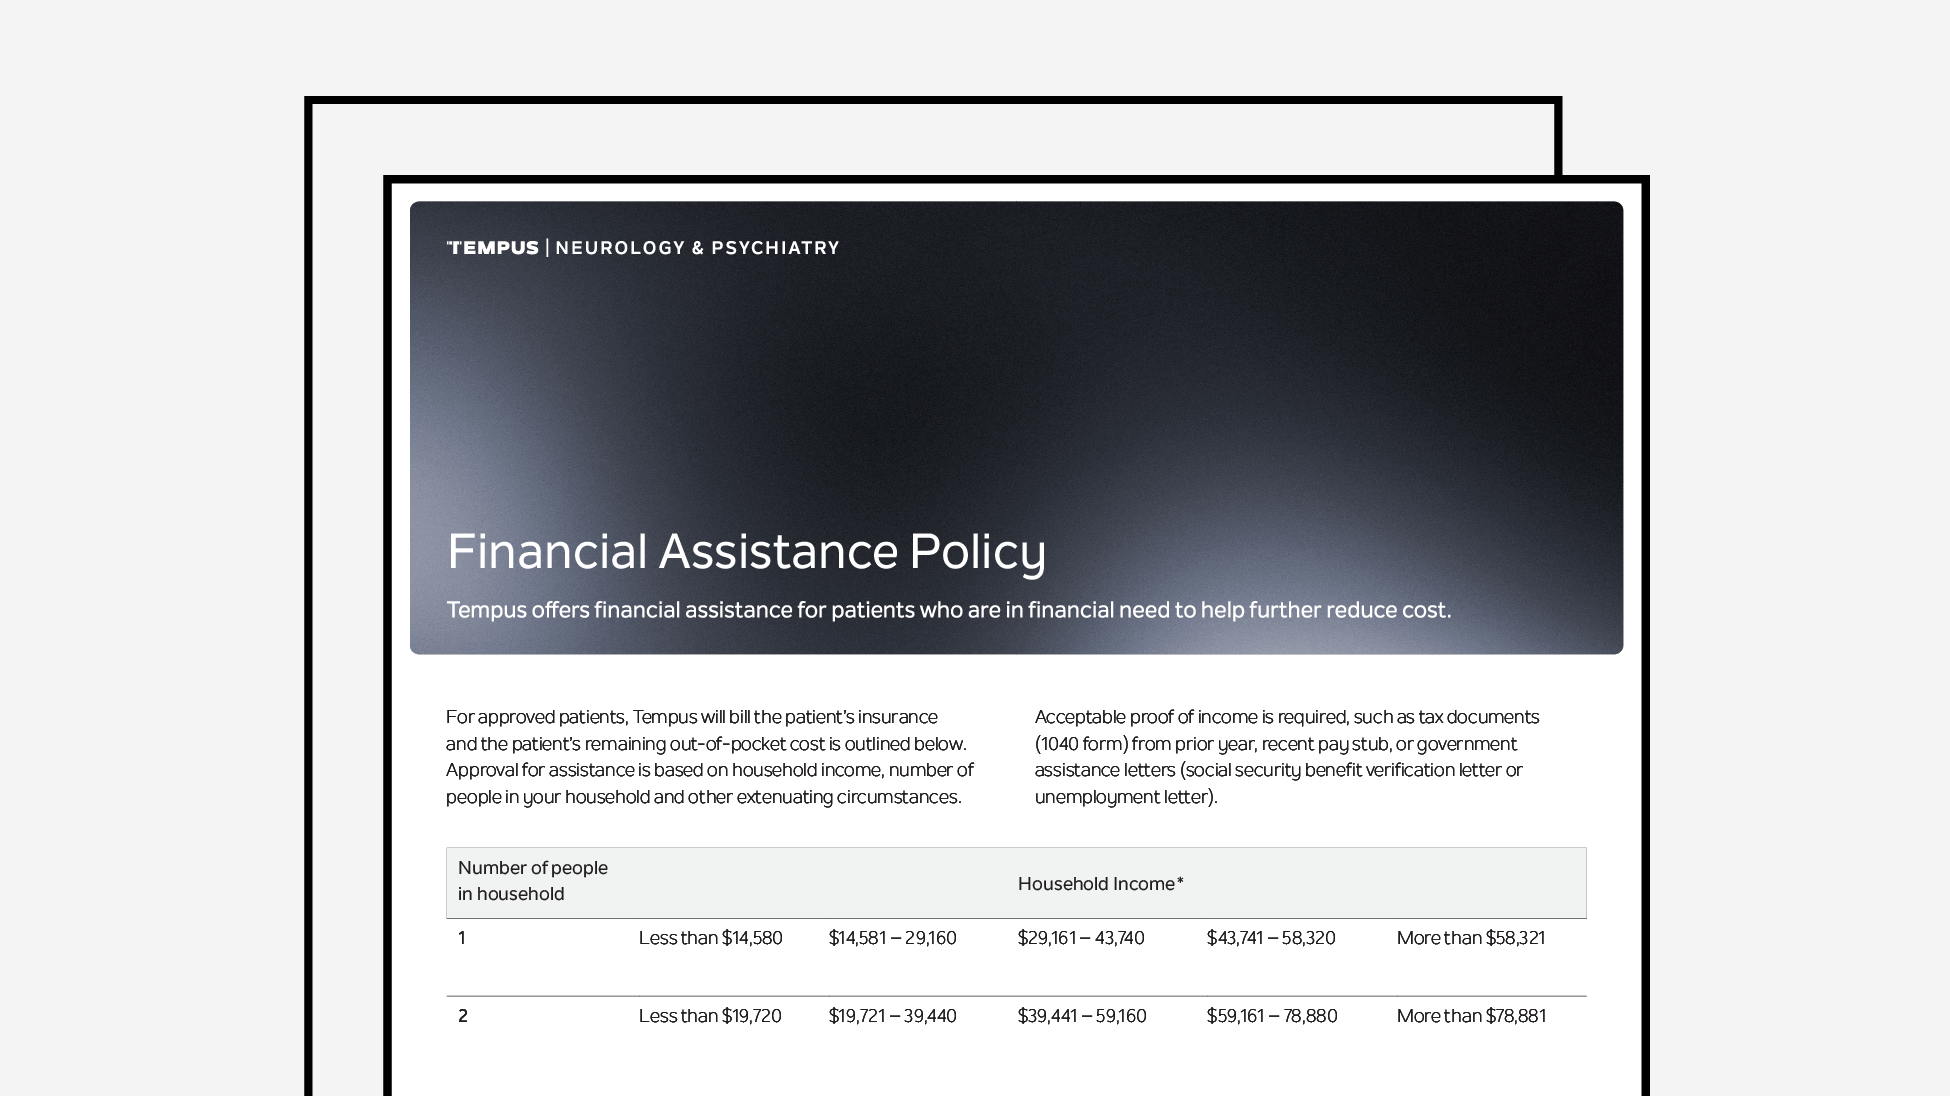 nP Financial Assistance Policy